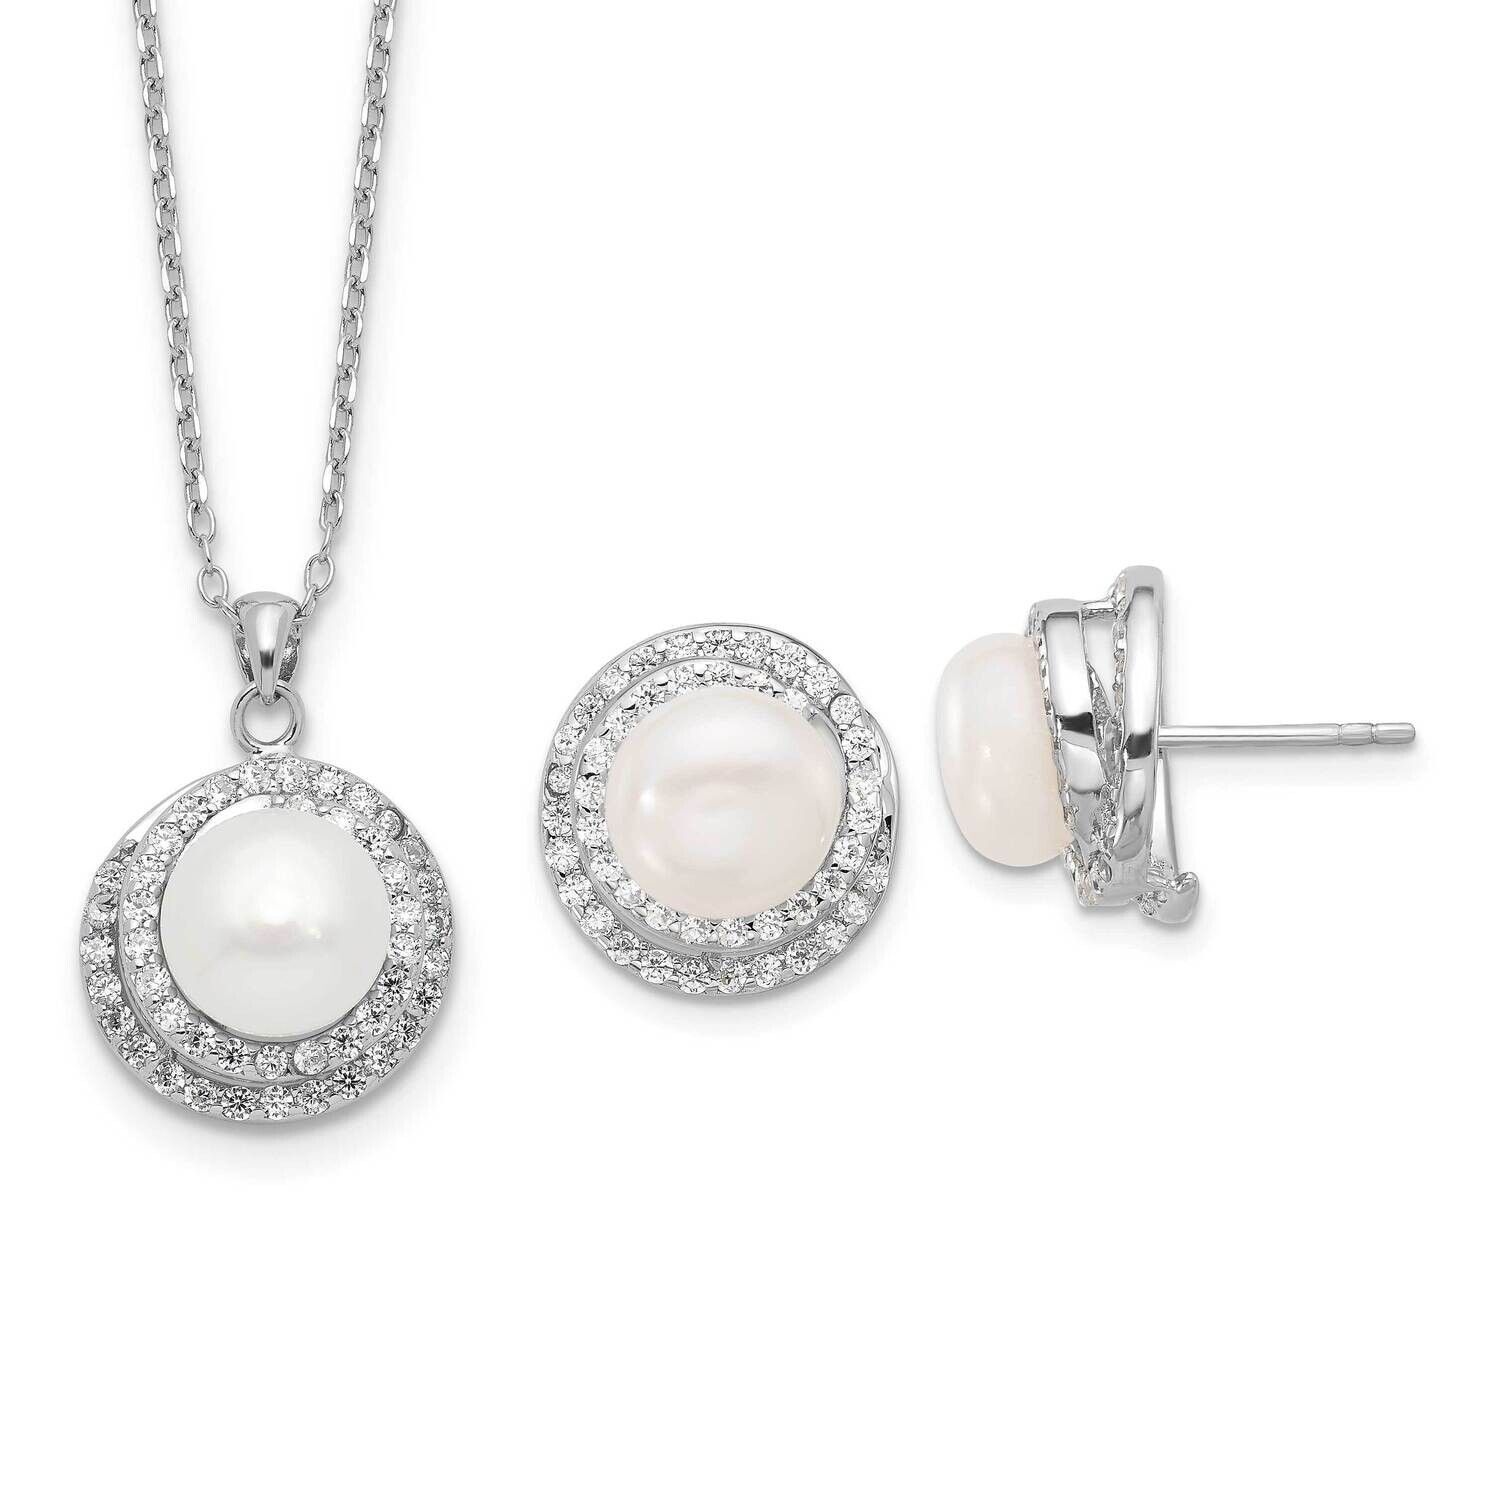 Rh-Plated Fwc Pearl CZ 17 Inch Necklace Post Earrings Set Sterling Silver QH5822SET